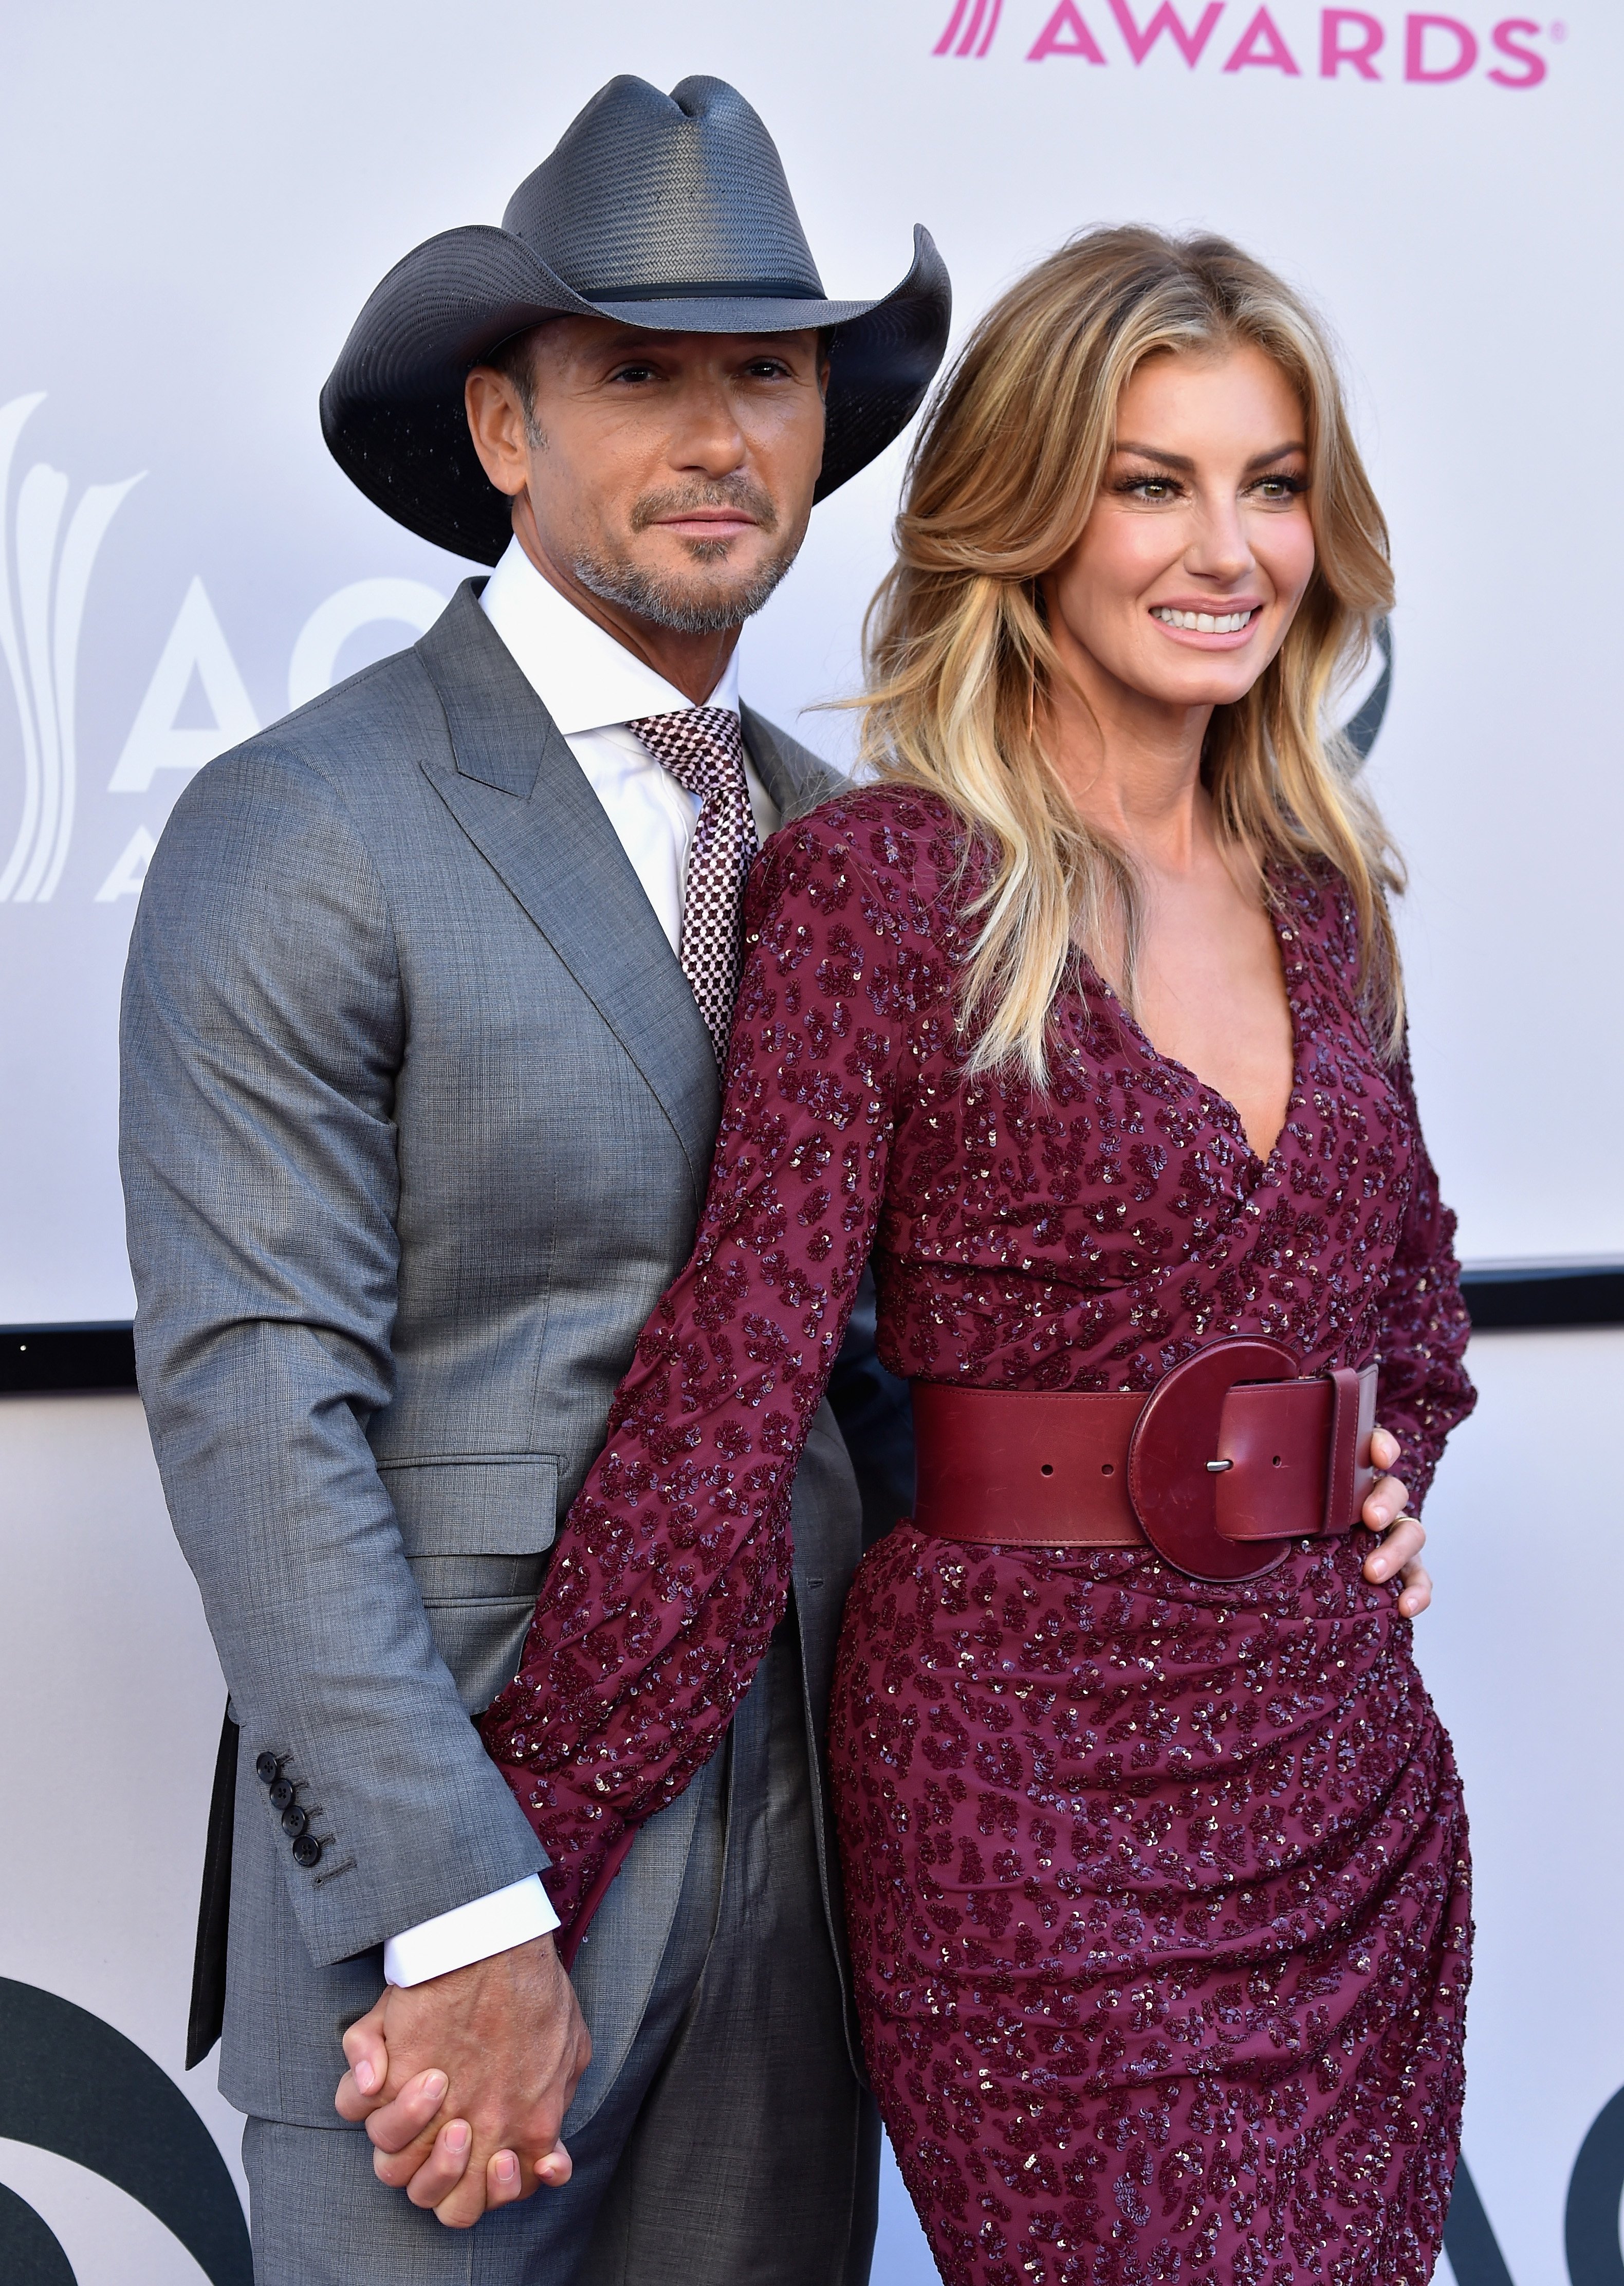 Tim McGraw and Faith Hill attend the 52nd Academy Of Country Music Awards at on April 2, 2017. | Photo: Getty Images